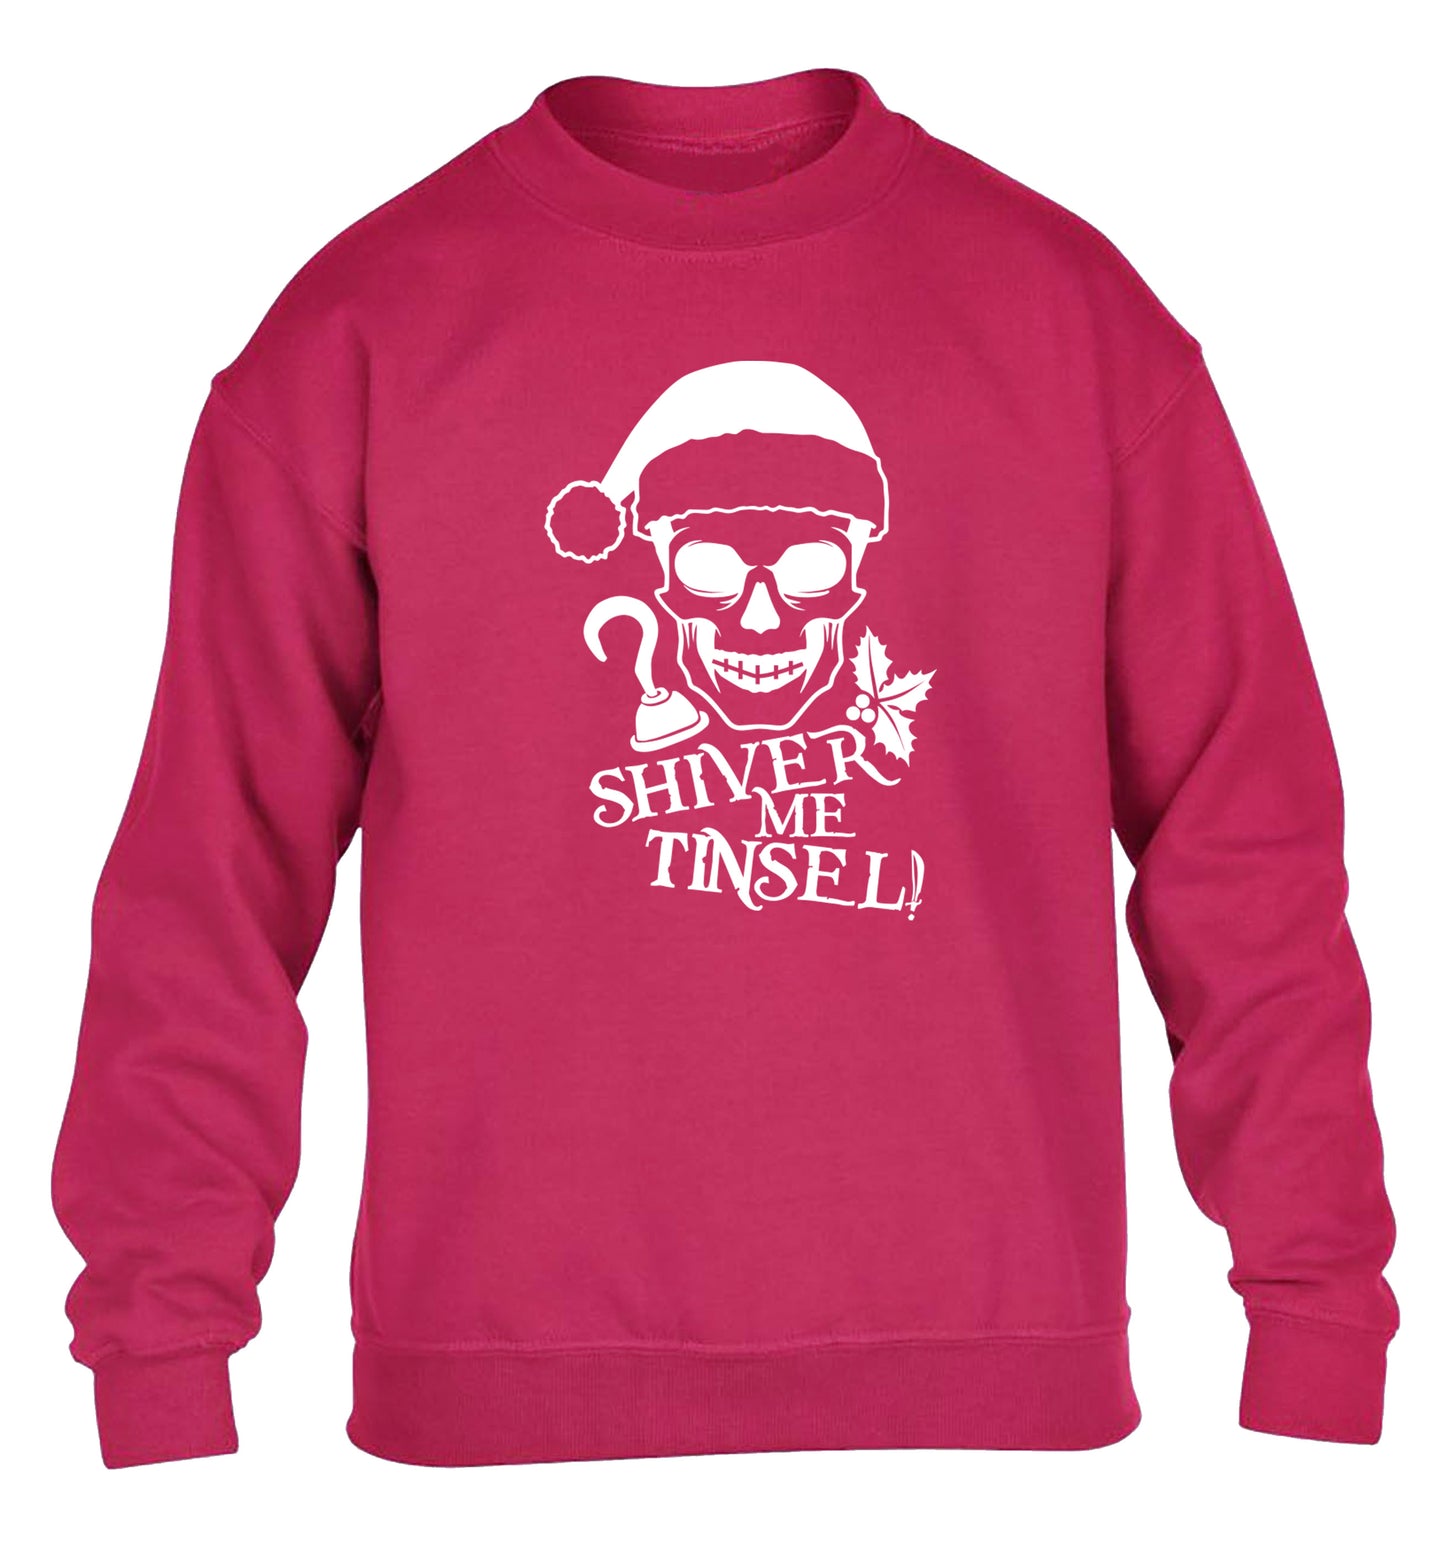 Shiver me tinsel children's pink sweater 12-14 Years